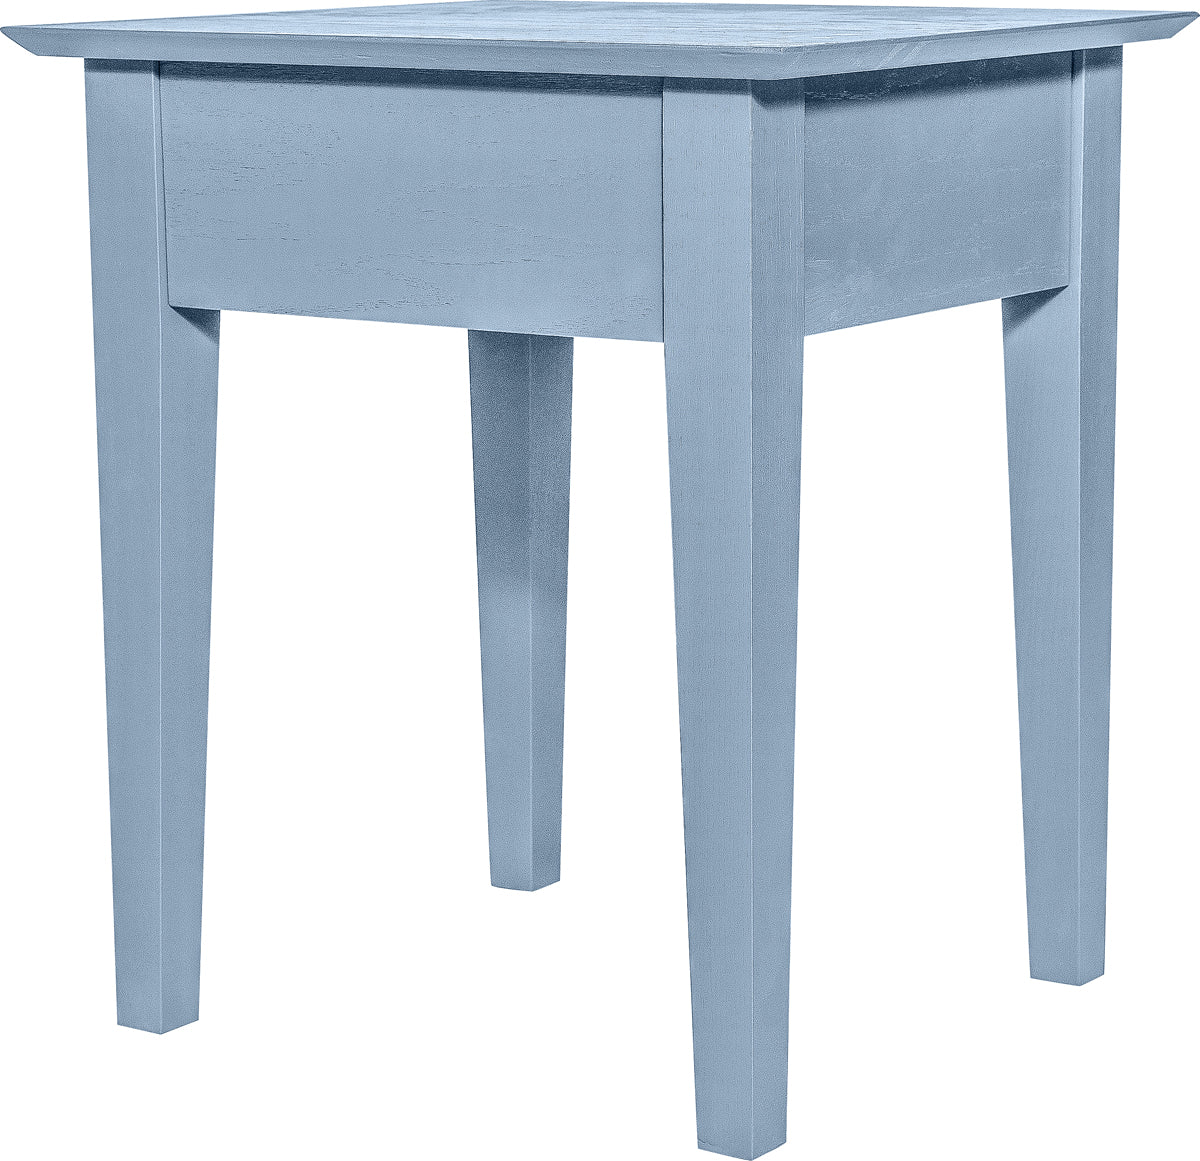 THE DIPLOMAT: End Table - Side Table